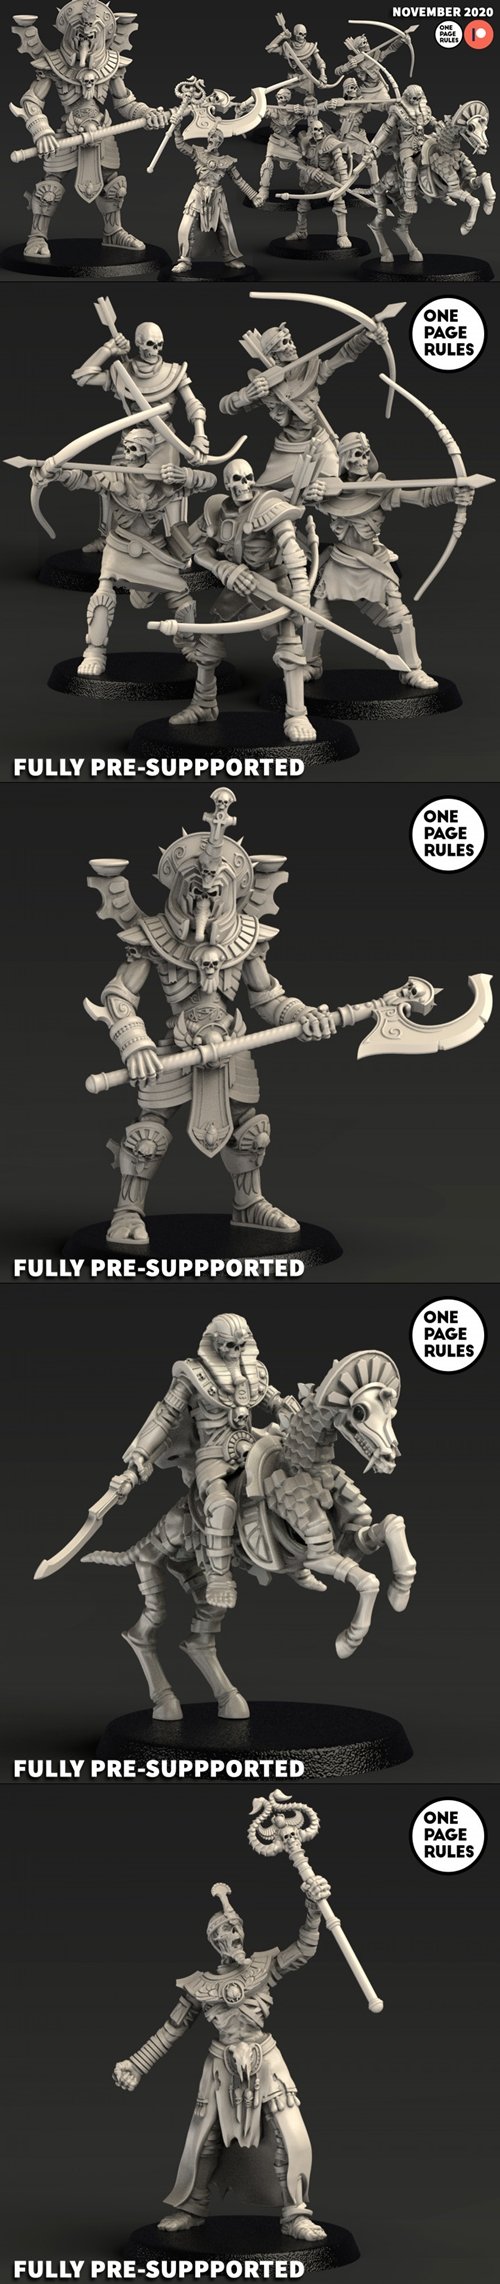 One Page Rules November 2020 – 3D Printable STL